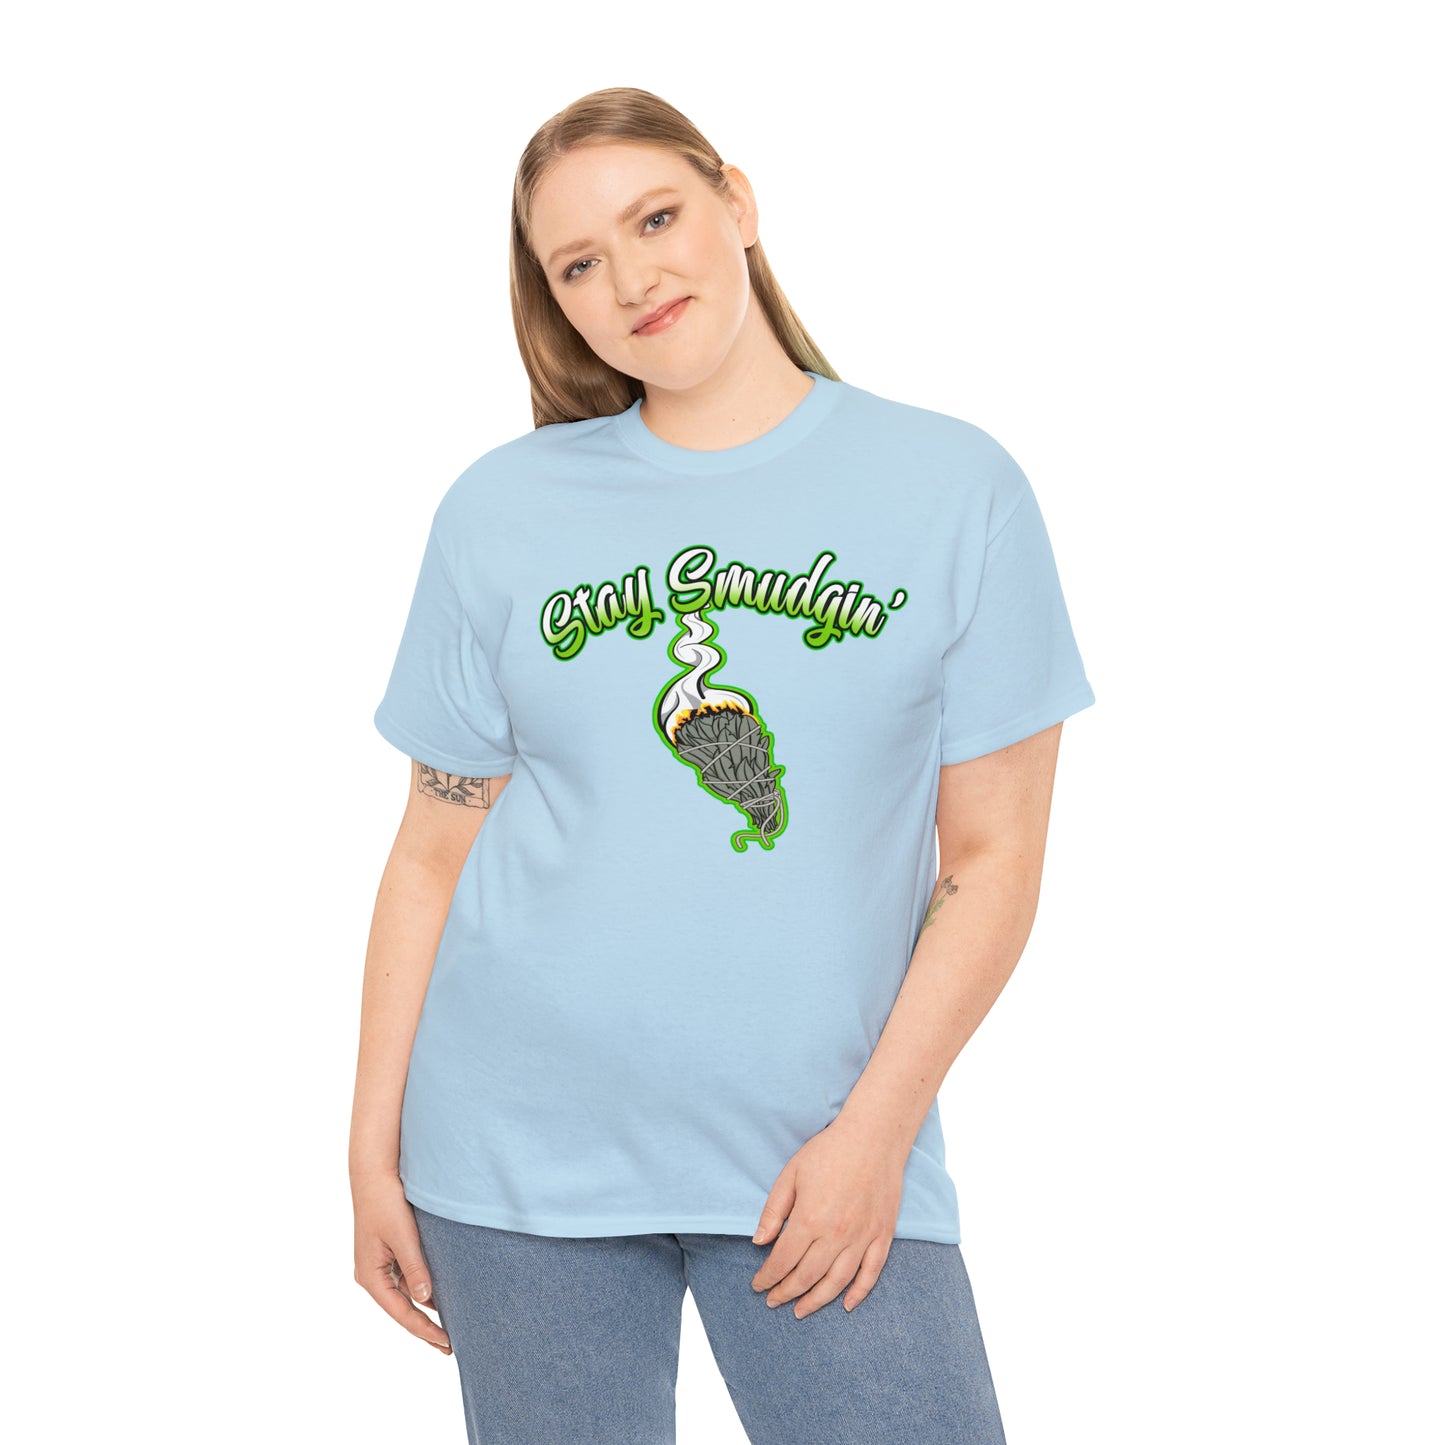 Stay Smudgin' T Shirt